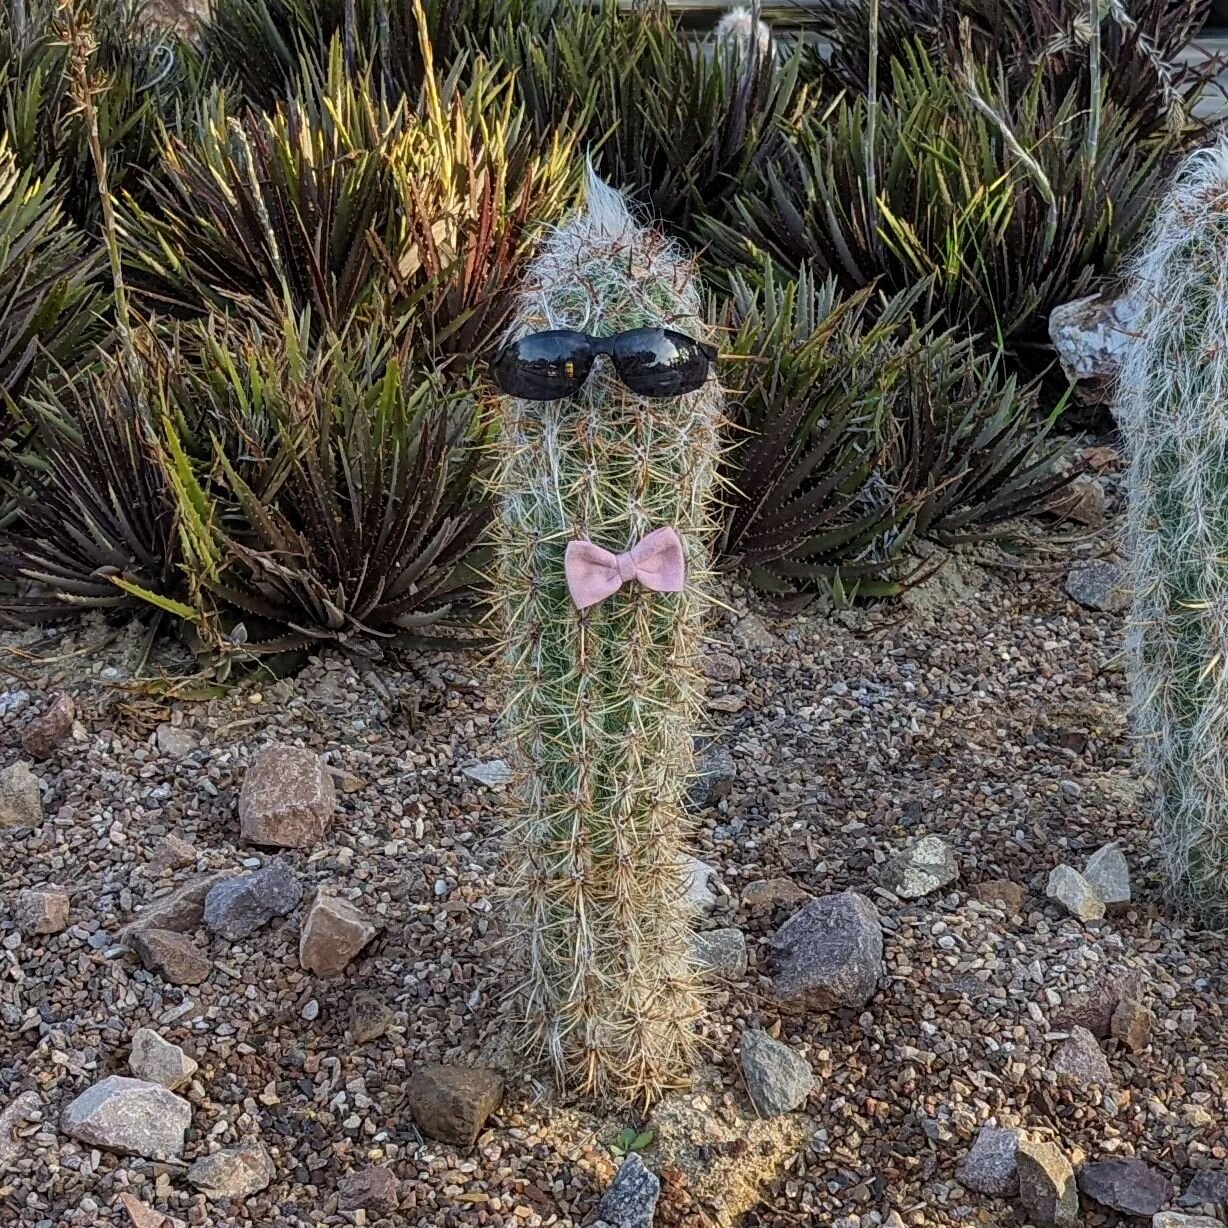 In the heat of August, remember to stay cool, like this cactus